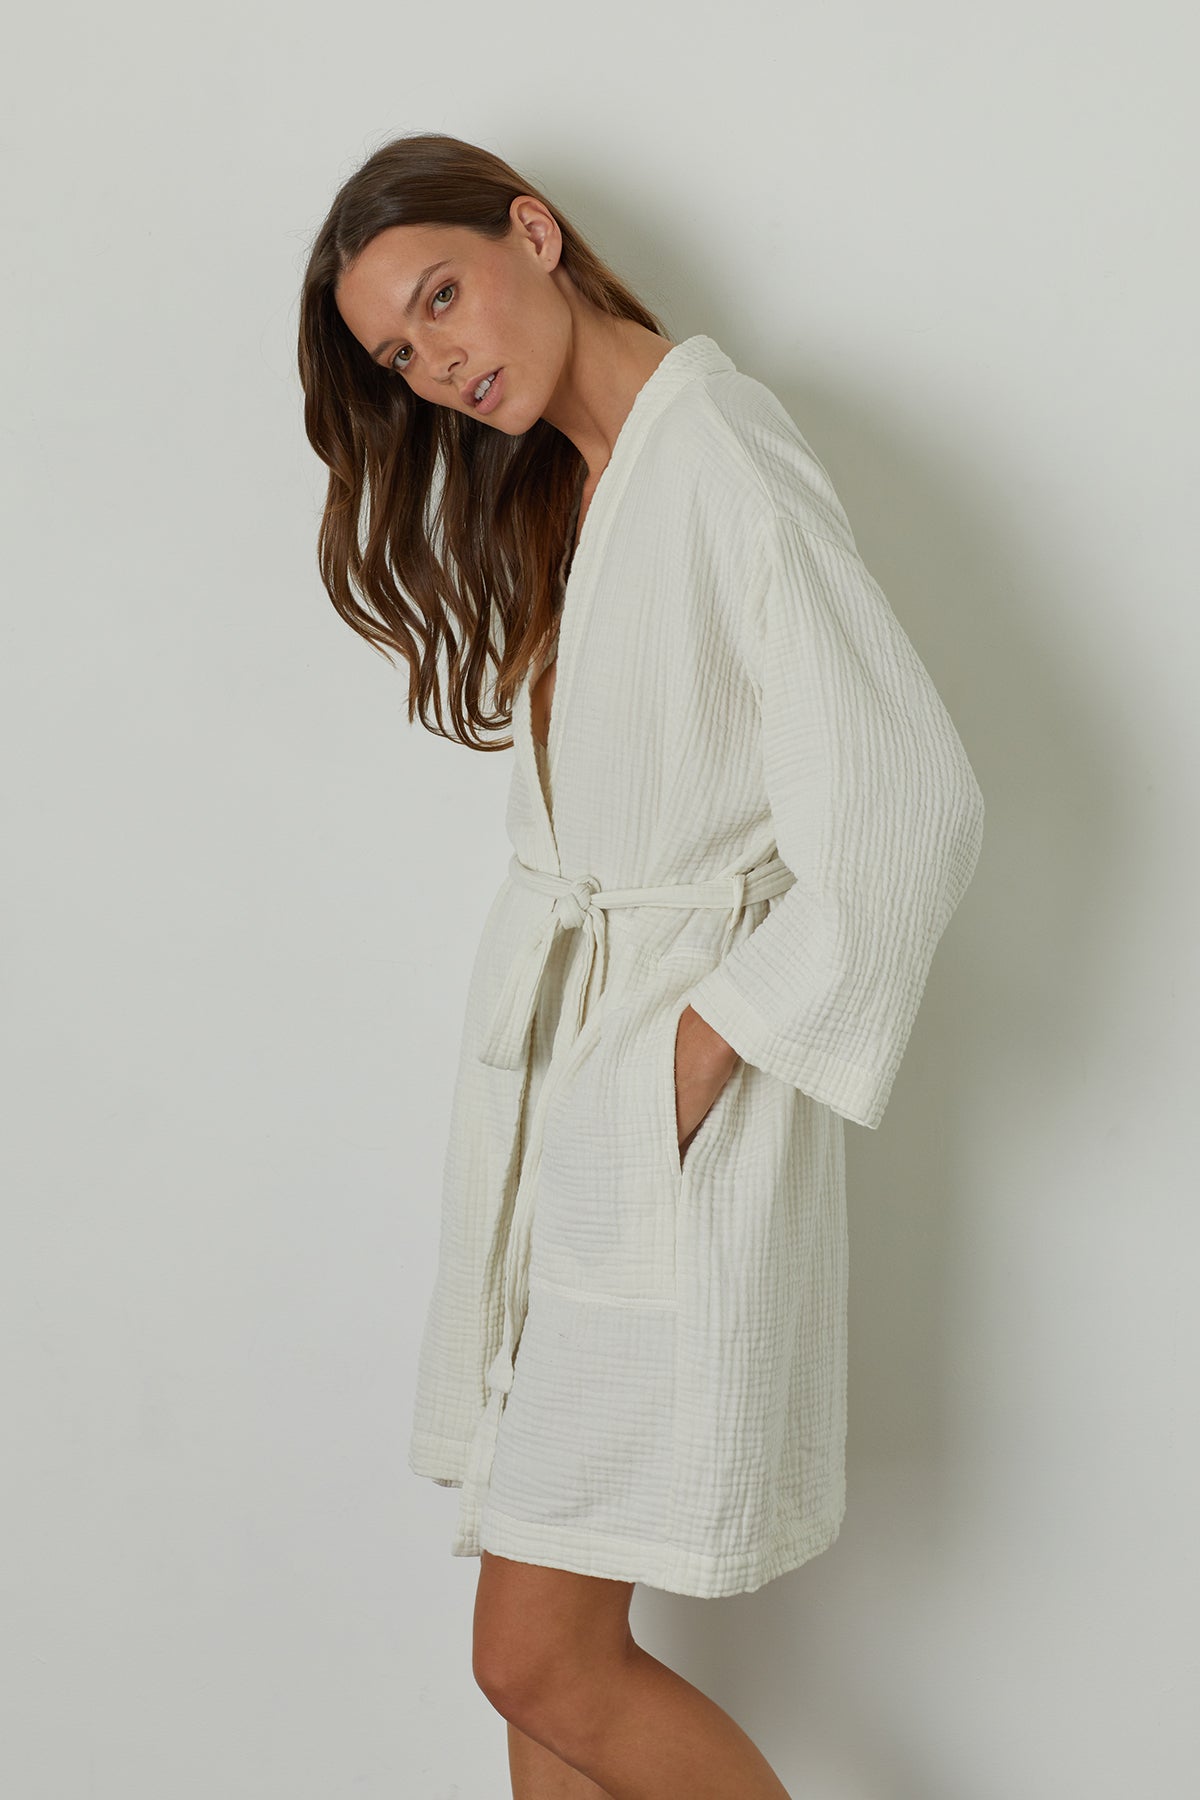   The model is wearing a soft texture, MINI COTTON GAUZE ROBE by Jenny Graham Home with a belt. 